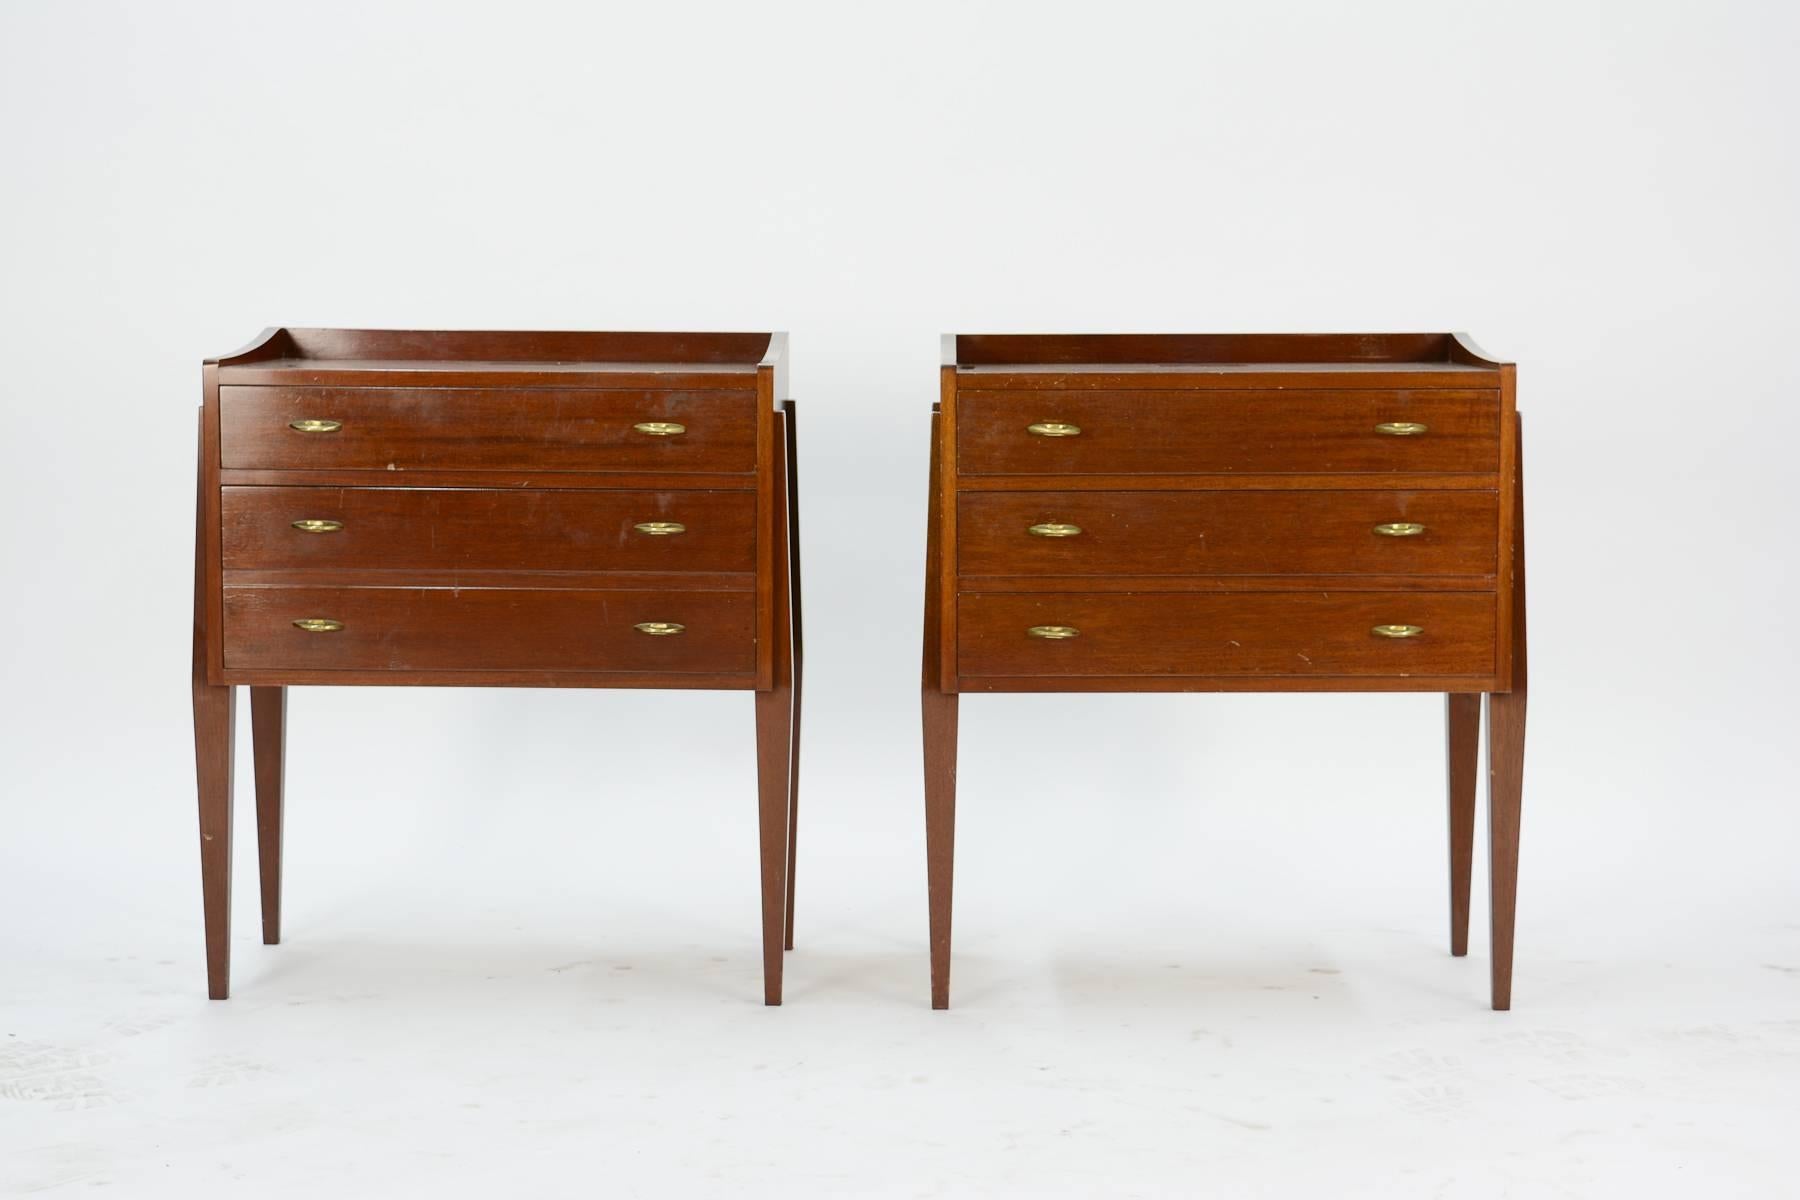 A wonderful pair of Mahogany chest of drawers, nightstands or end tables by Frode Holm for high end Danish furniture company Illums Bolighus of Denmark. The pair features brass pulls and tappered legs with three drawers each.